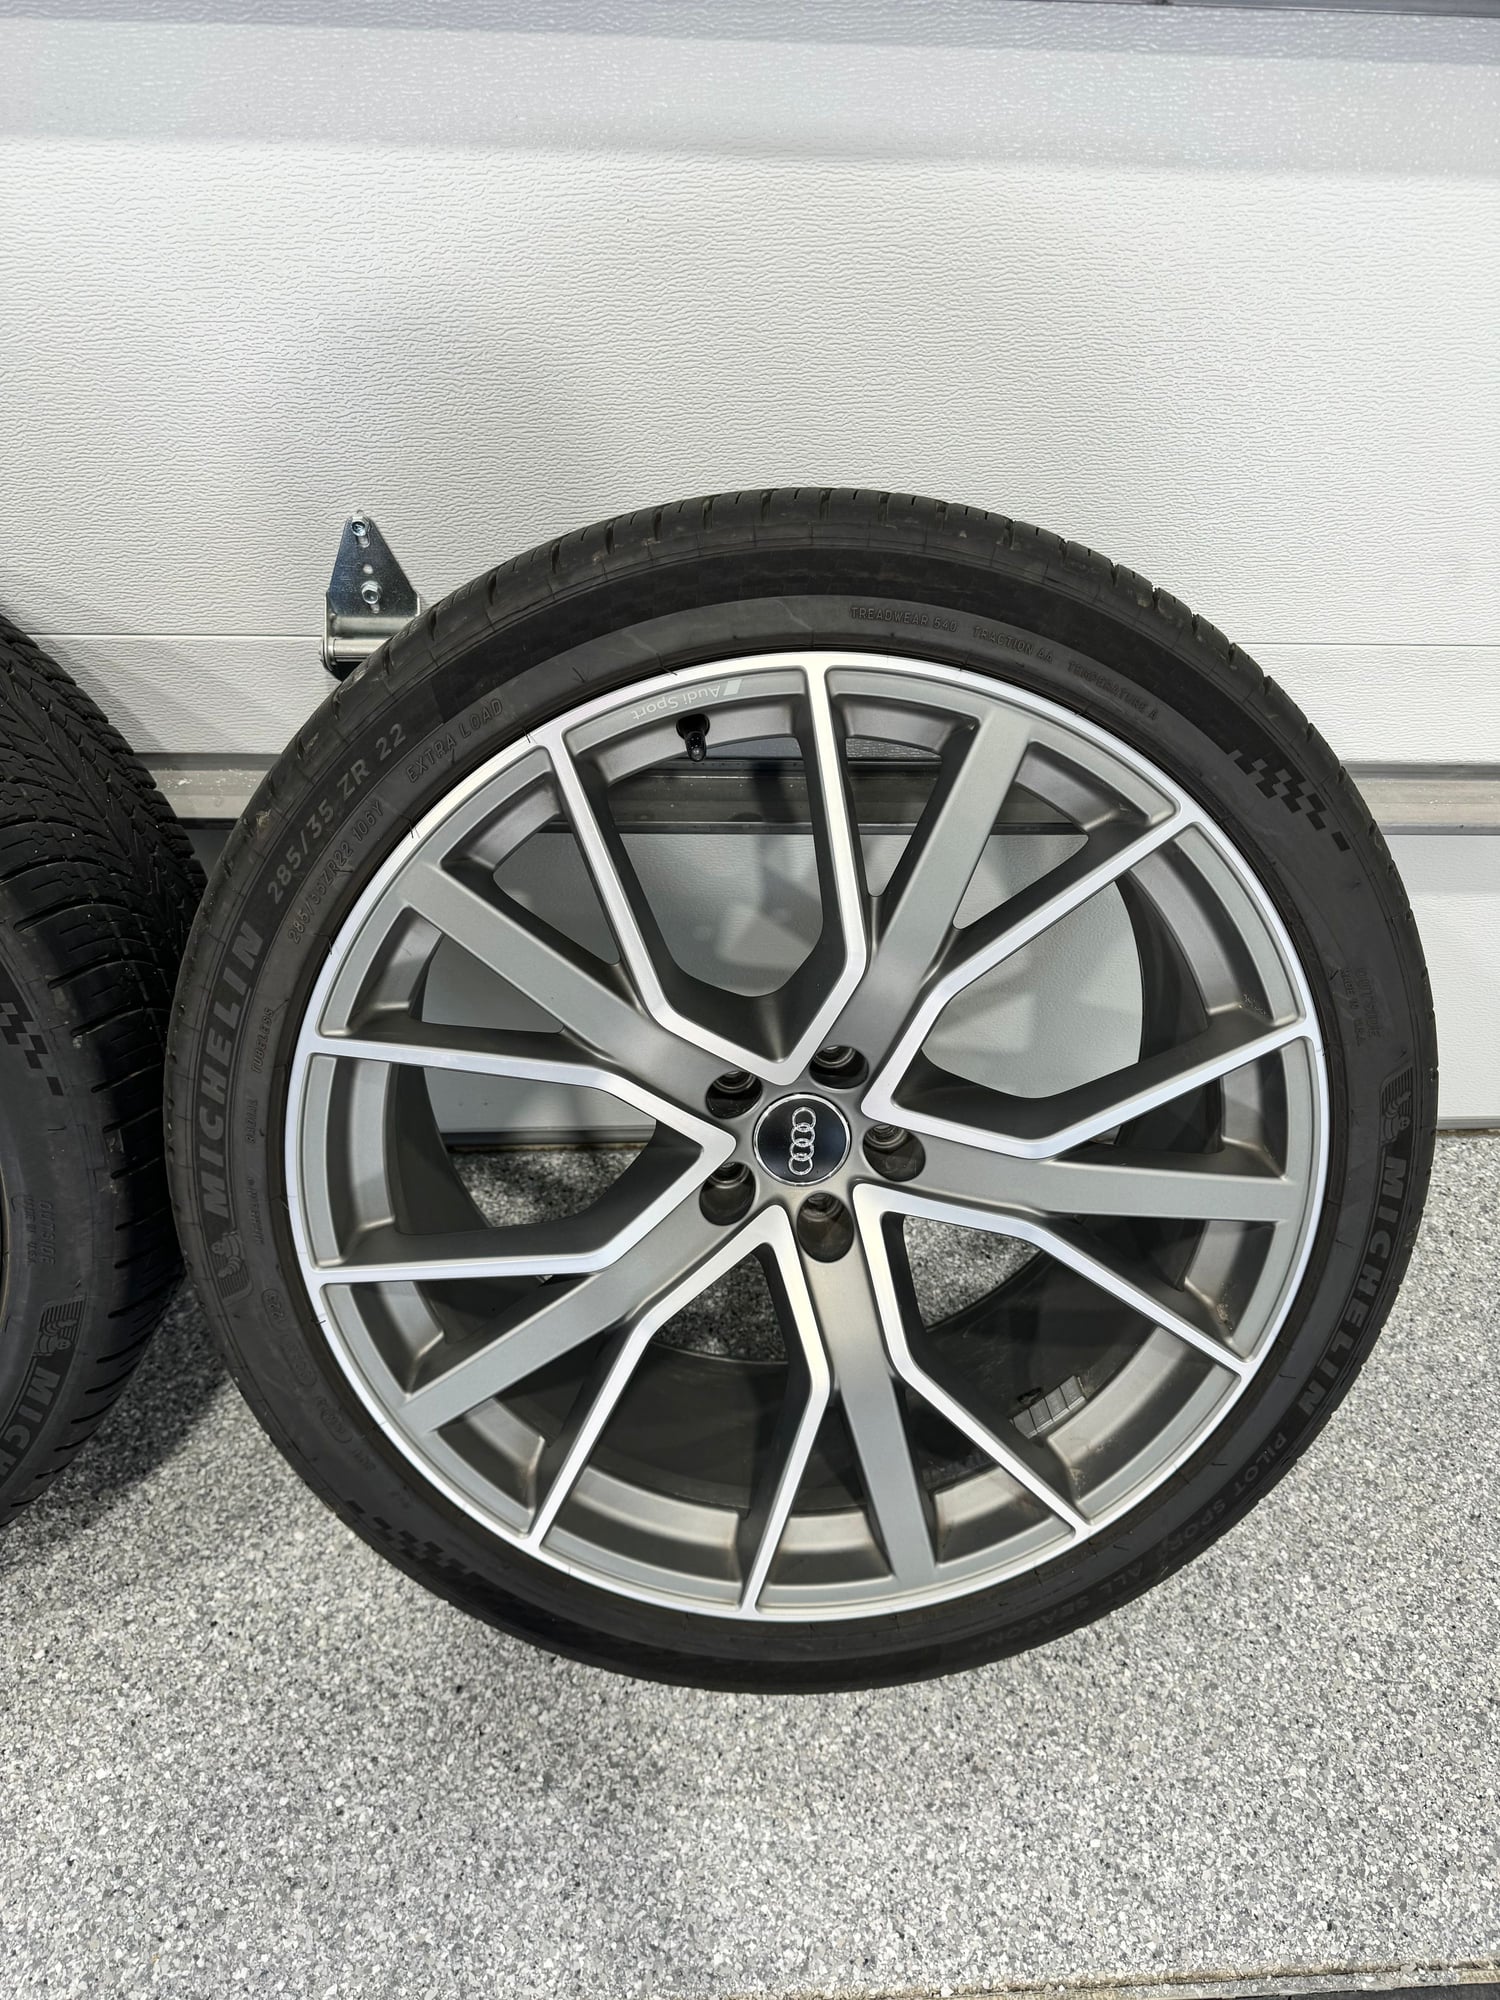 Wheels and Tires/Axles - FS: 22" Audi Sport wheels w/ nearly new MPS AS Tires - Used - 0  All Models - Waukee, IA 50263, United States